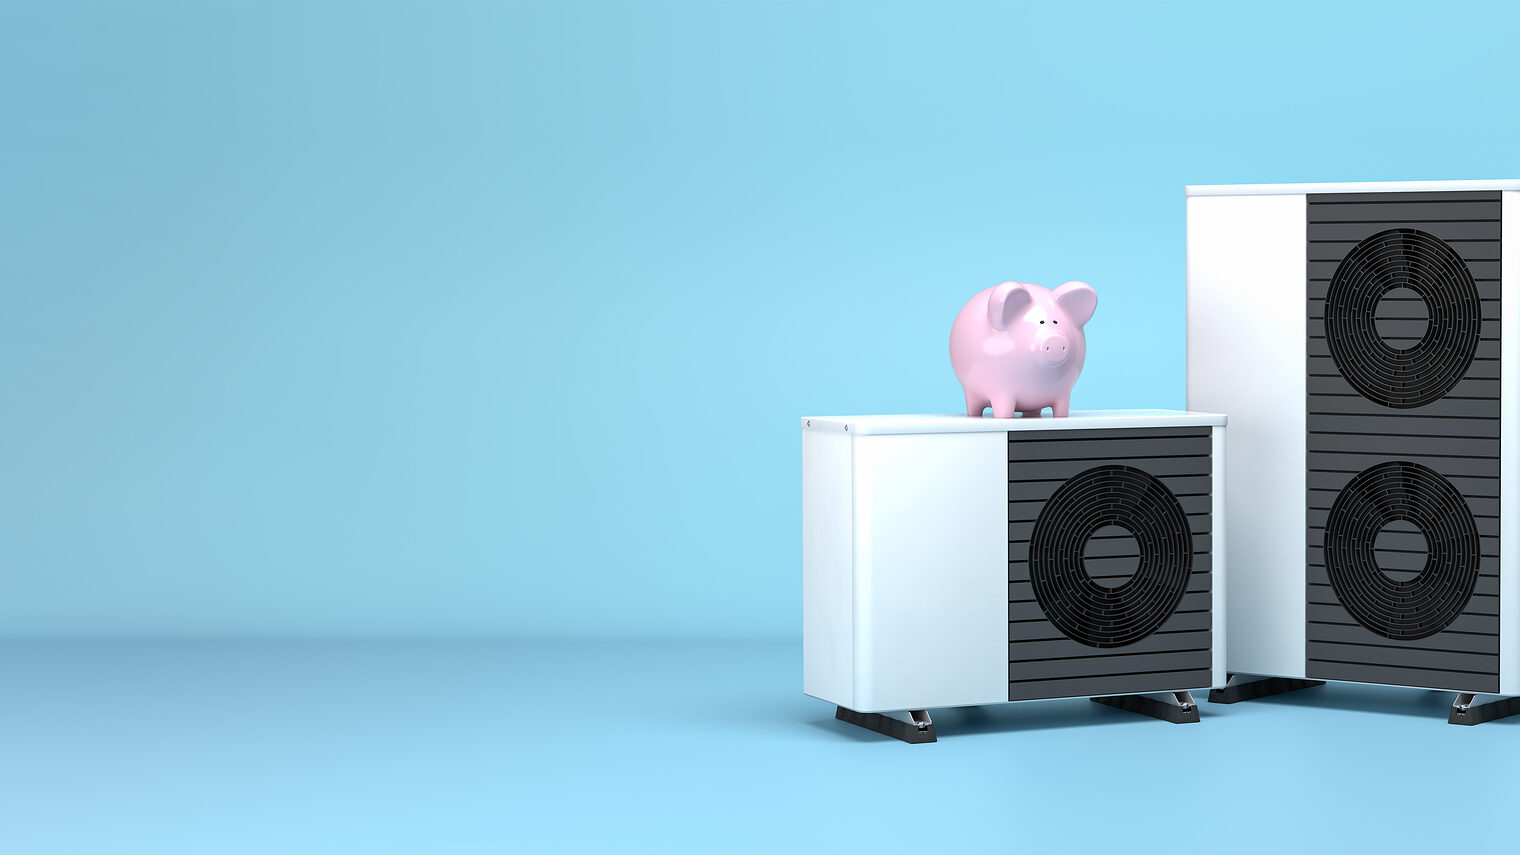 3d render of a small and large fictitious air source heat pump with a piggy bank on tip. Concept for saving energy and money by using electric air heat pumps. Web banner format. Schlagwort(e): heat pump, piggy bank, saving, air, damper, energy saving, fan, heating, energy conservation, efficiency, energy efficiency, electric, isolated, device, ecology, 3d rendering, cooling, outside, equipment, system, blue background, electrical, energy, power, object, appliance, detailweb banner